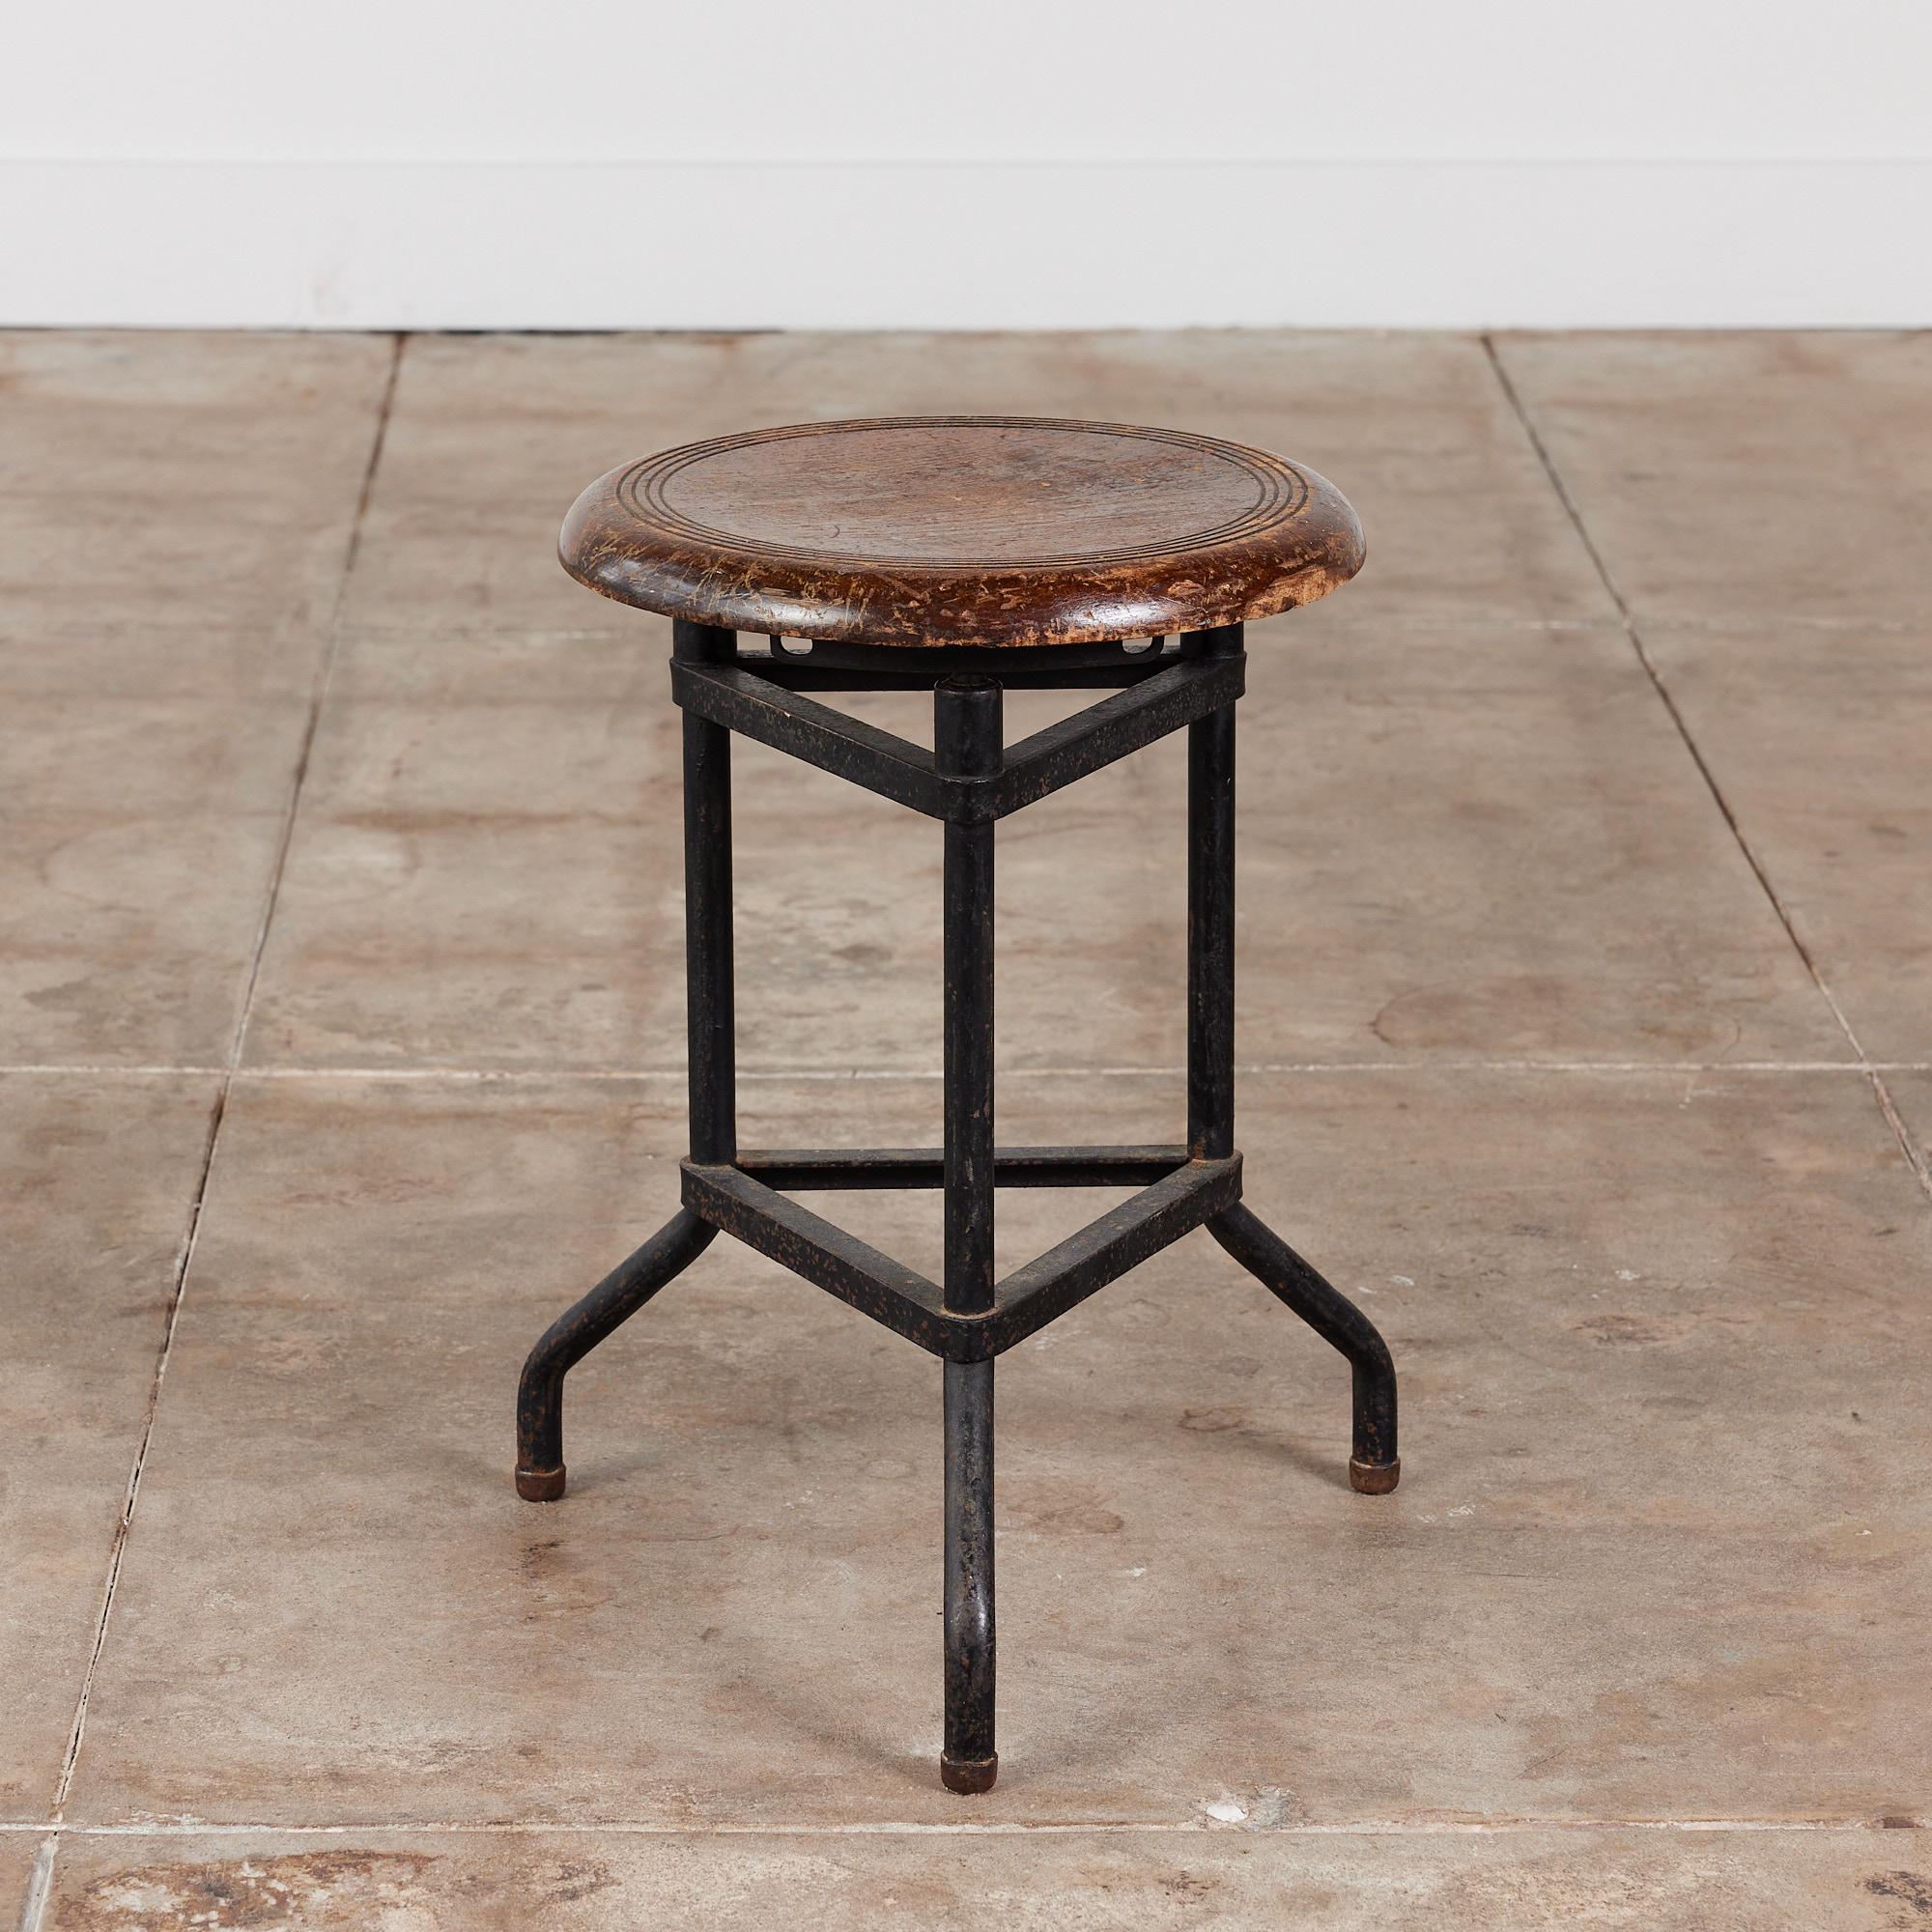 Adjustable stool by Campbell Corporation, circa 1990s, Rockford, Illinois. This industrial stool was used at the Campbell Corporation Headquarters Biotech Labs. The stool features a round wood seat and patinated tripod metal base. The seat height is